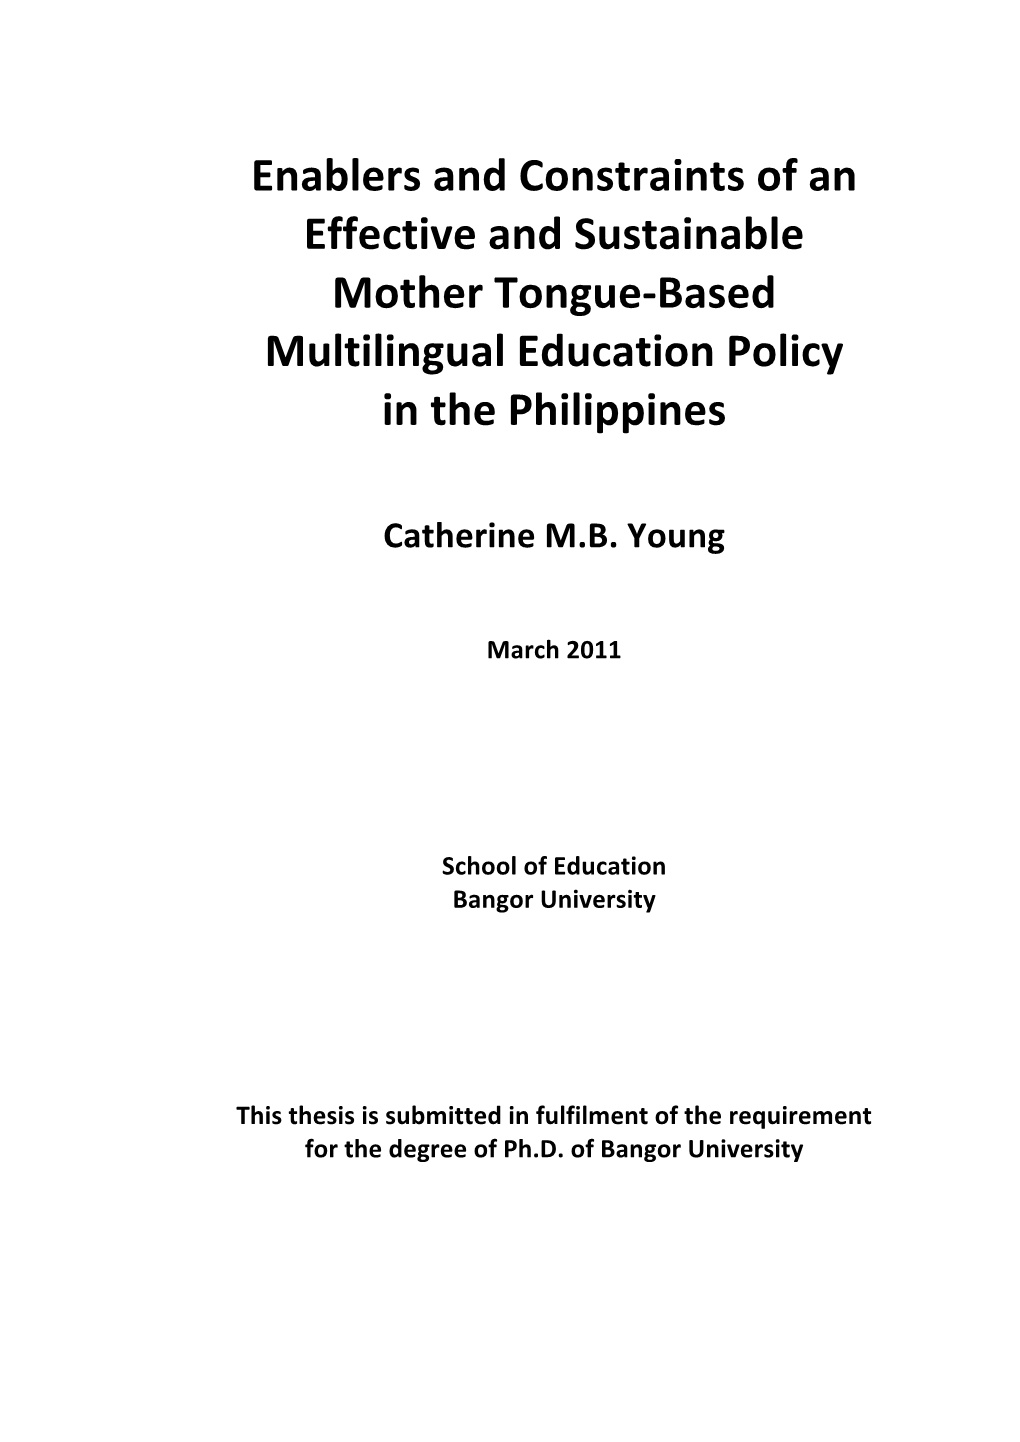 Based Multilingual Education Policy in the Philippines